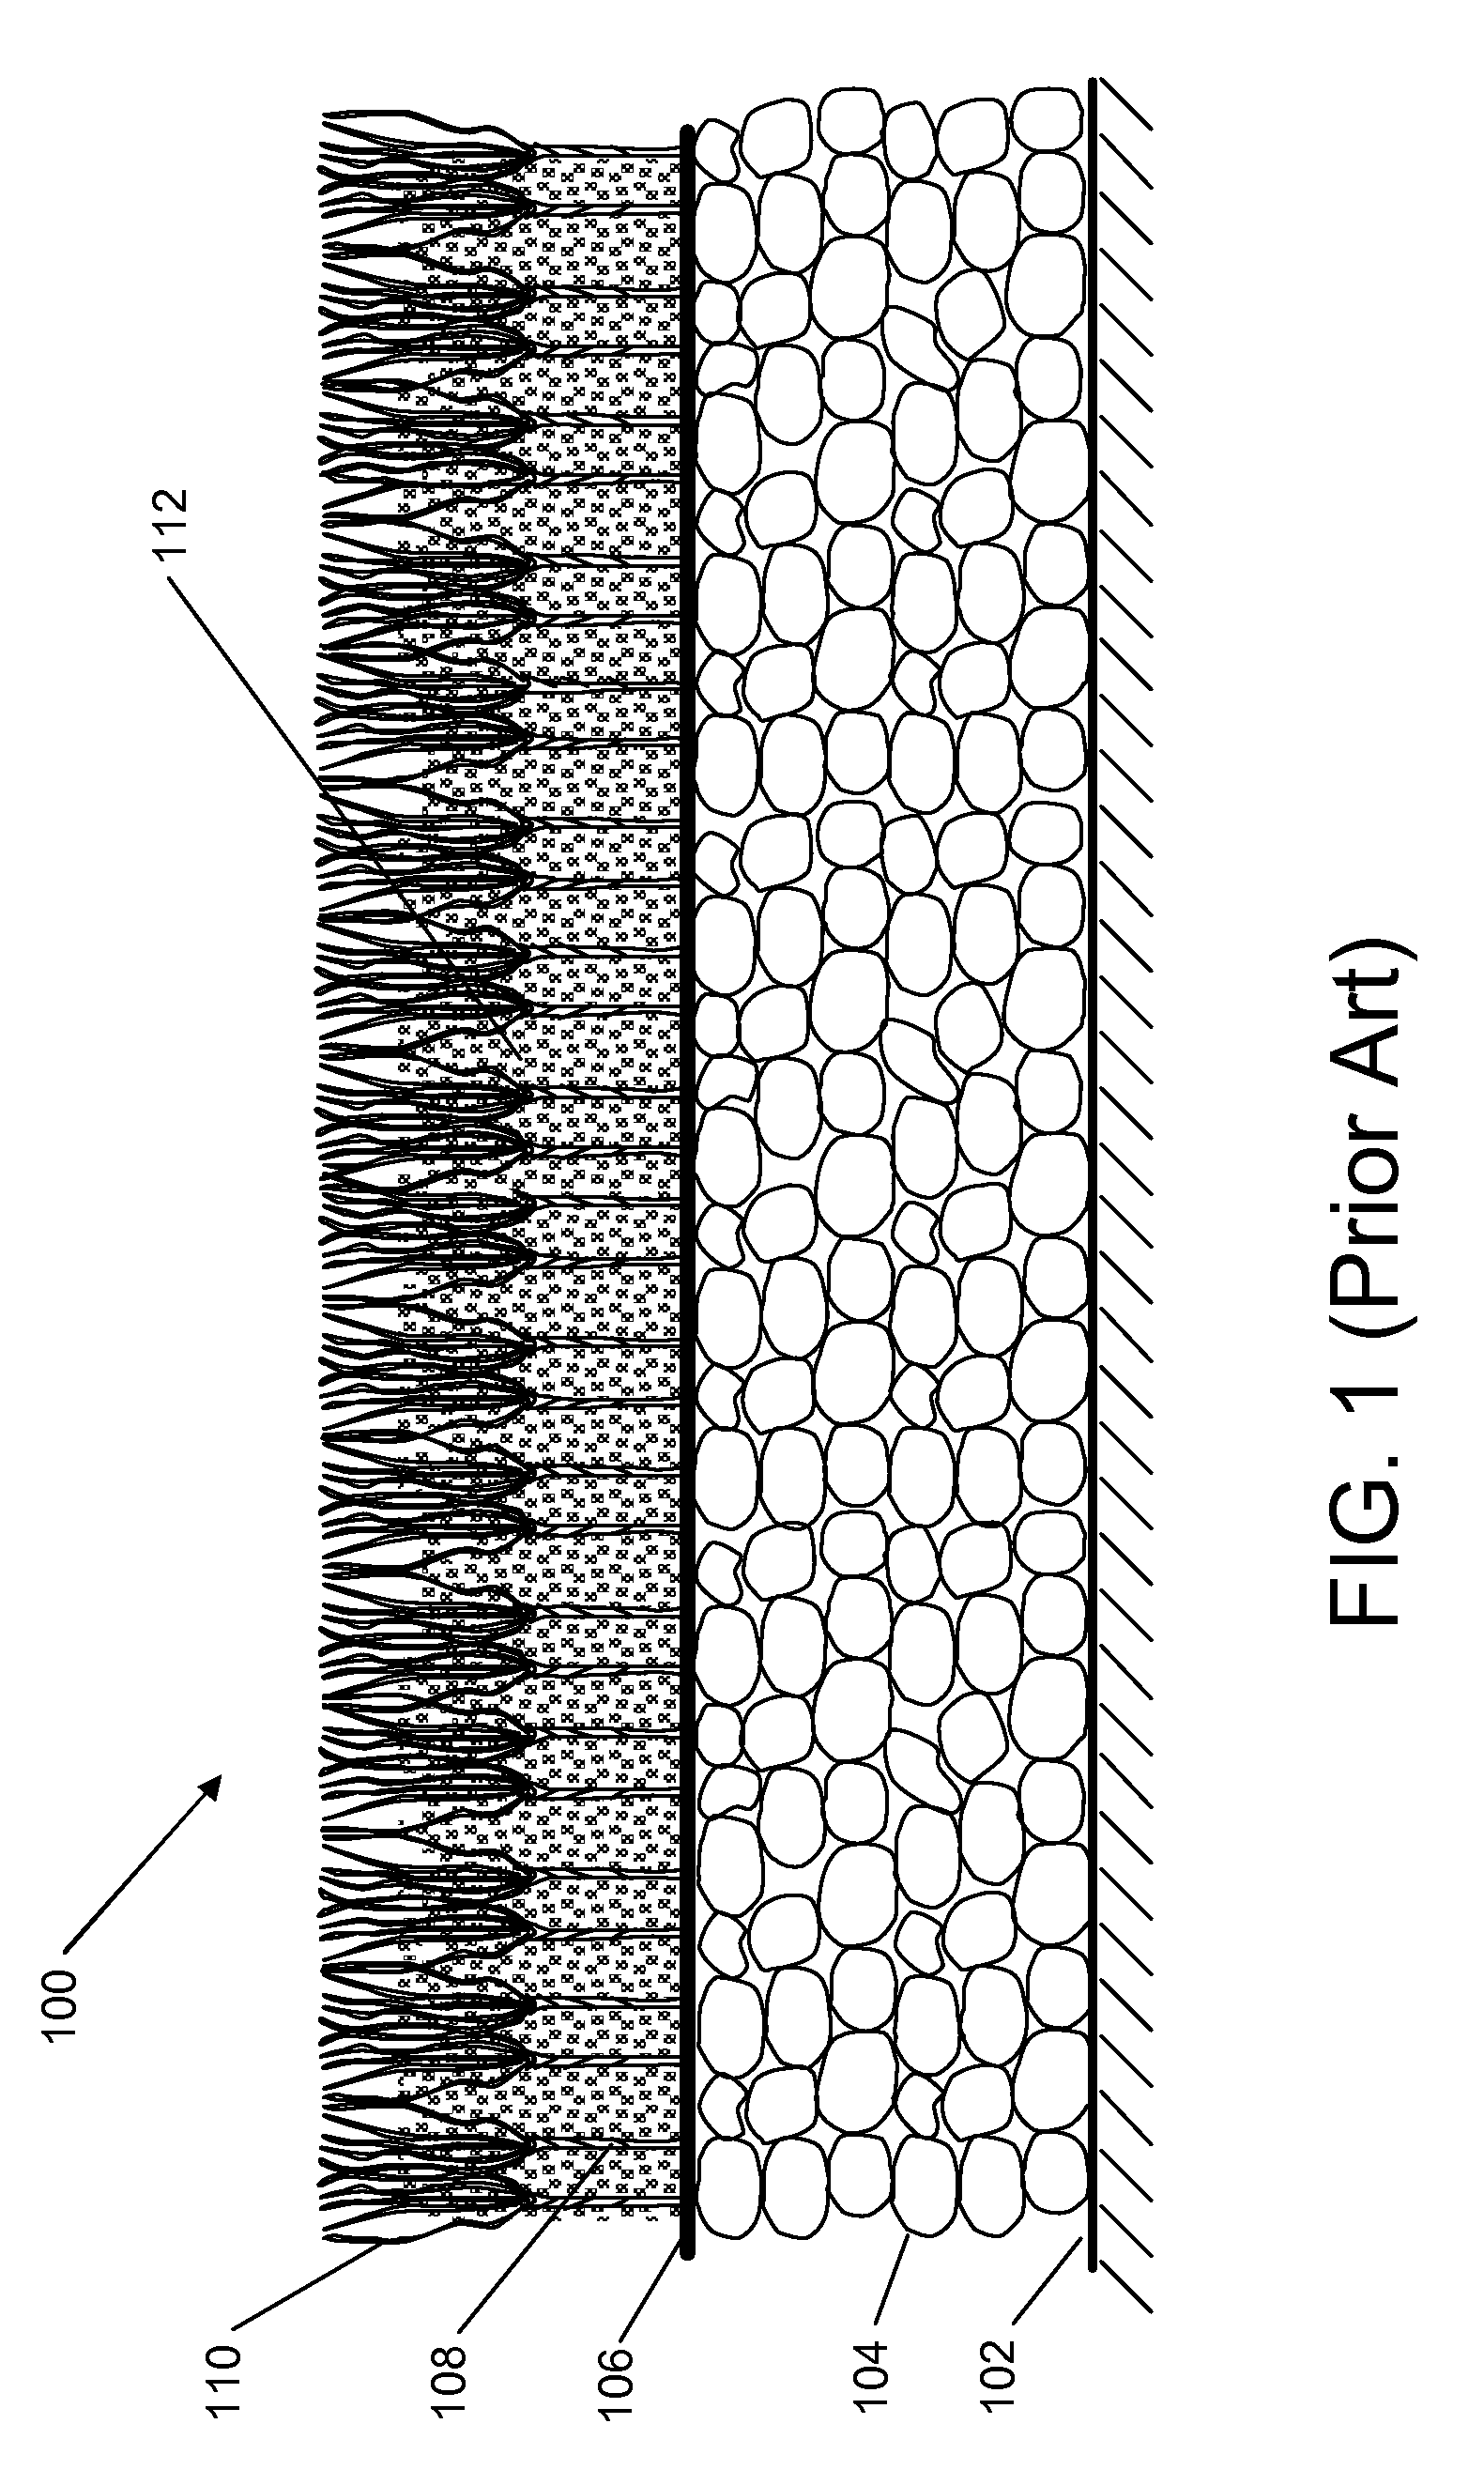 System and method for an improved artificial turf